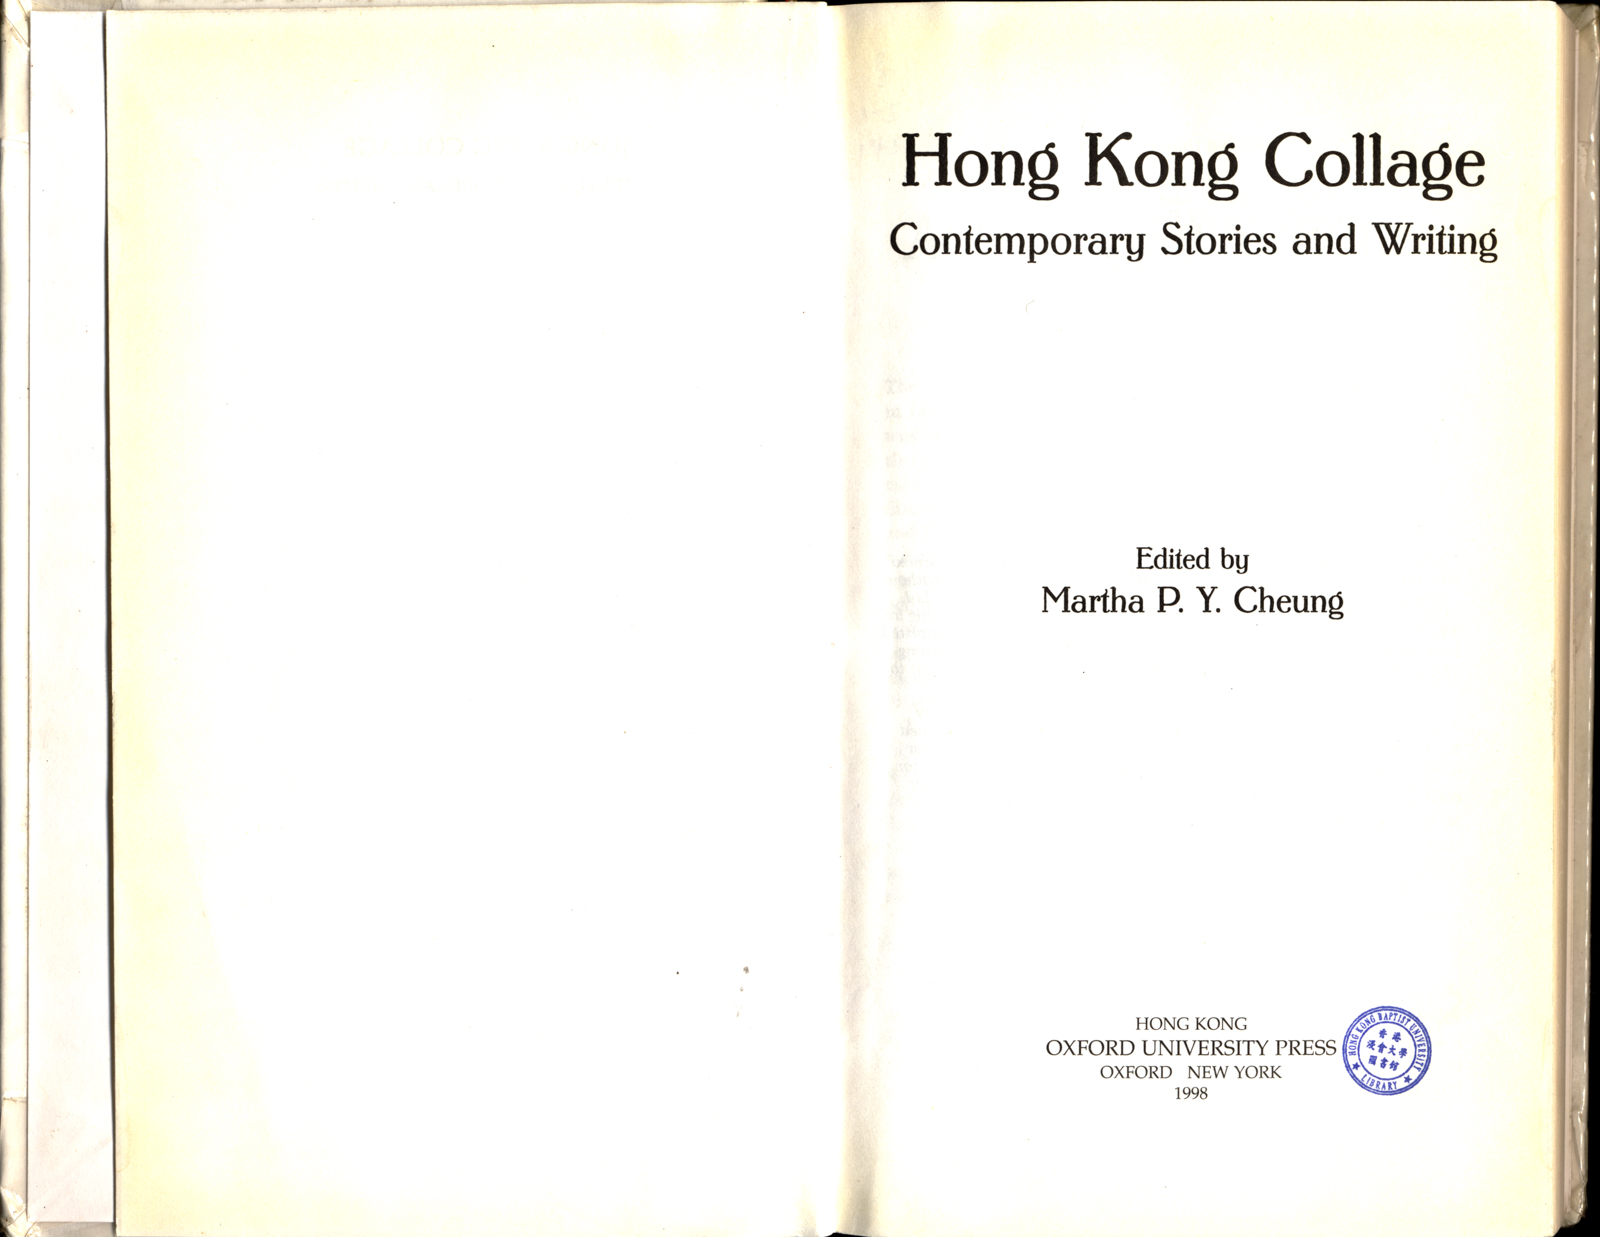 Hong Kong Collage: Contemporary Stories and Writing